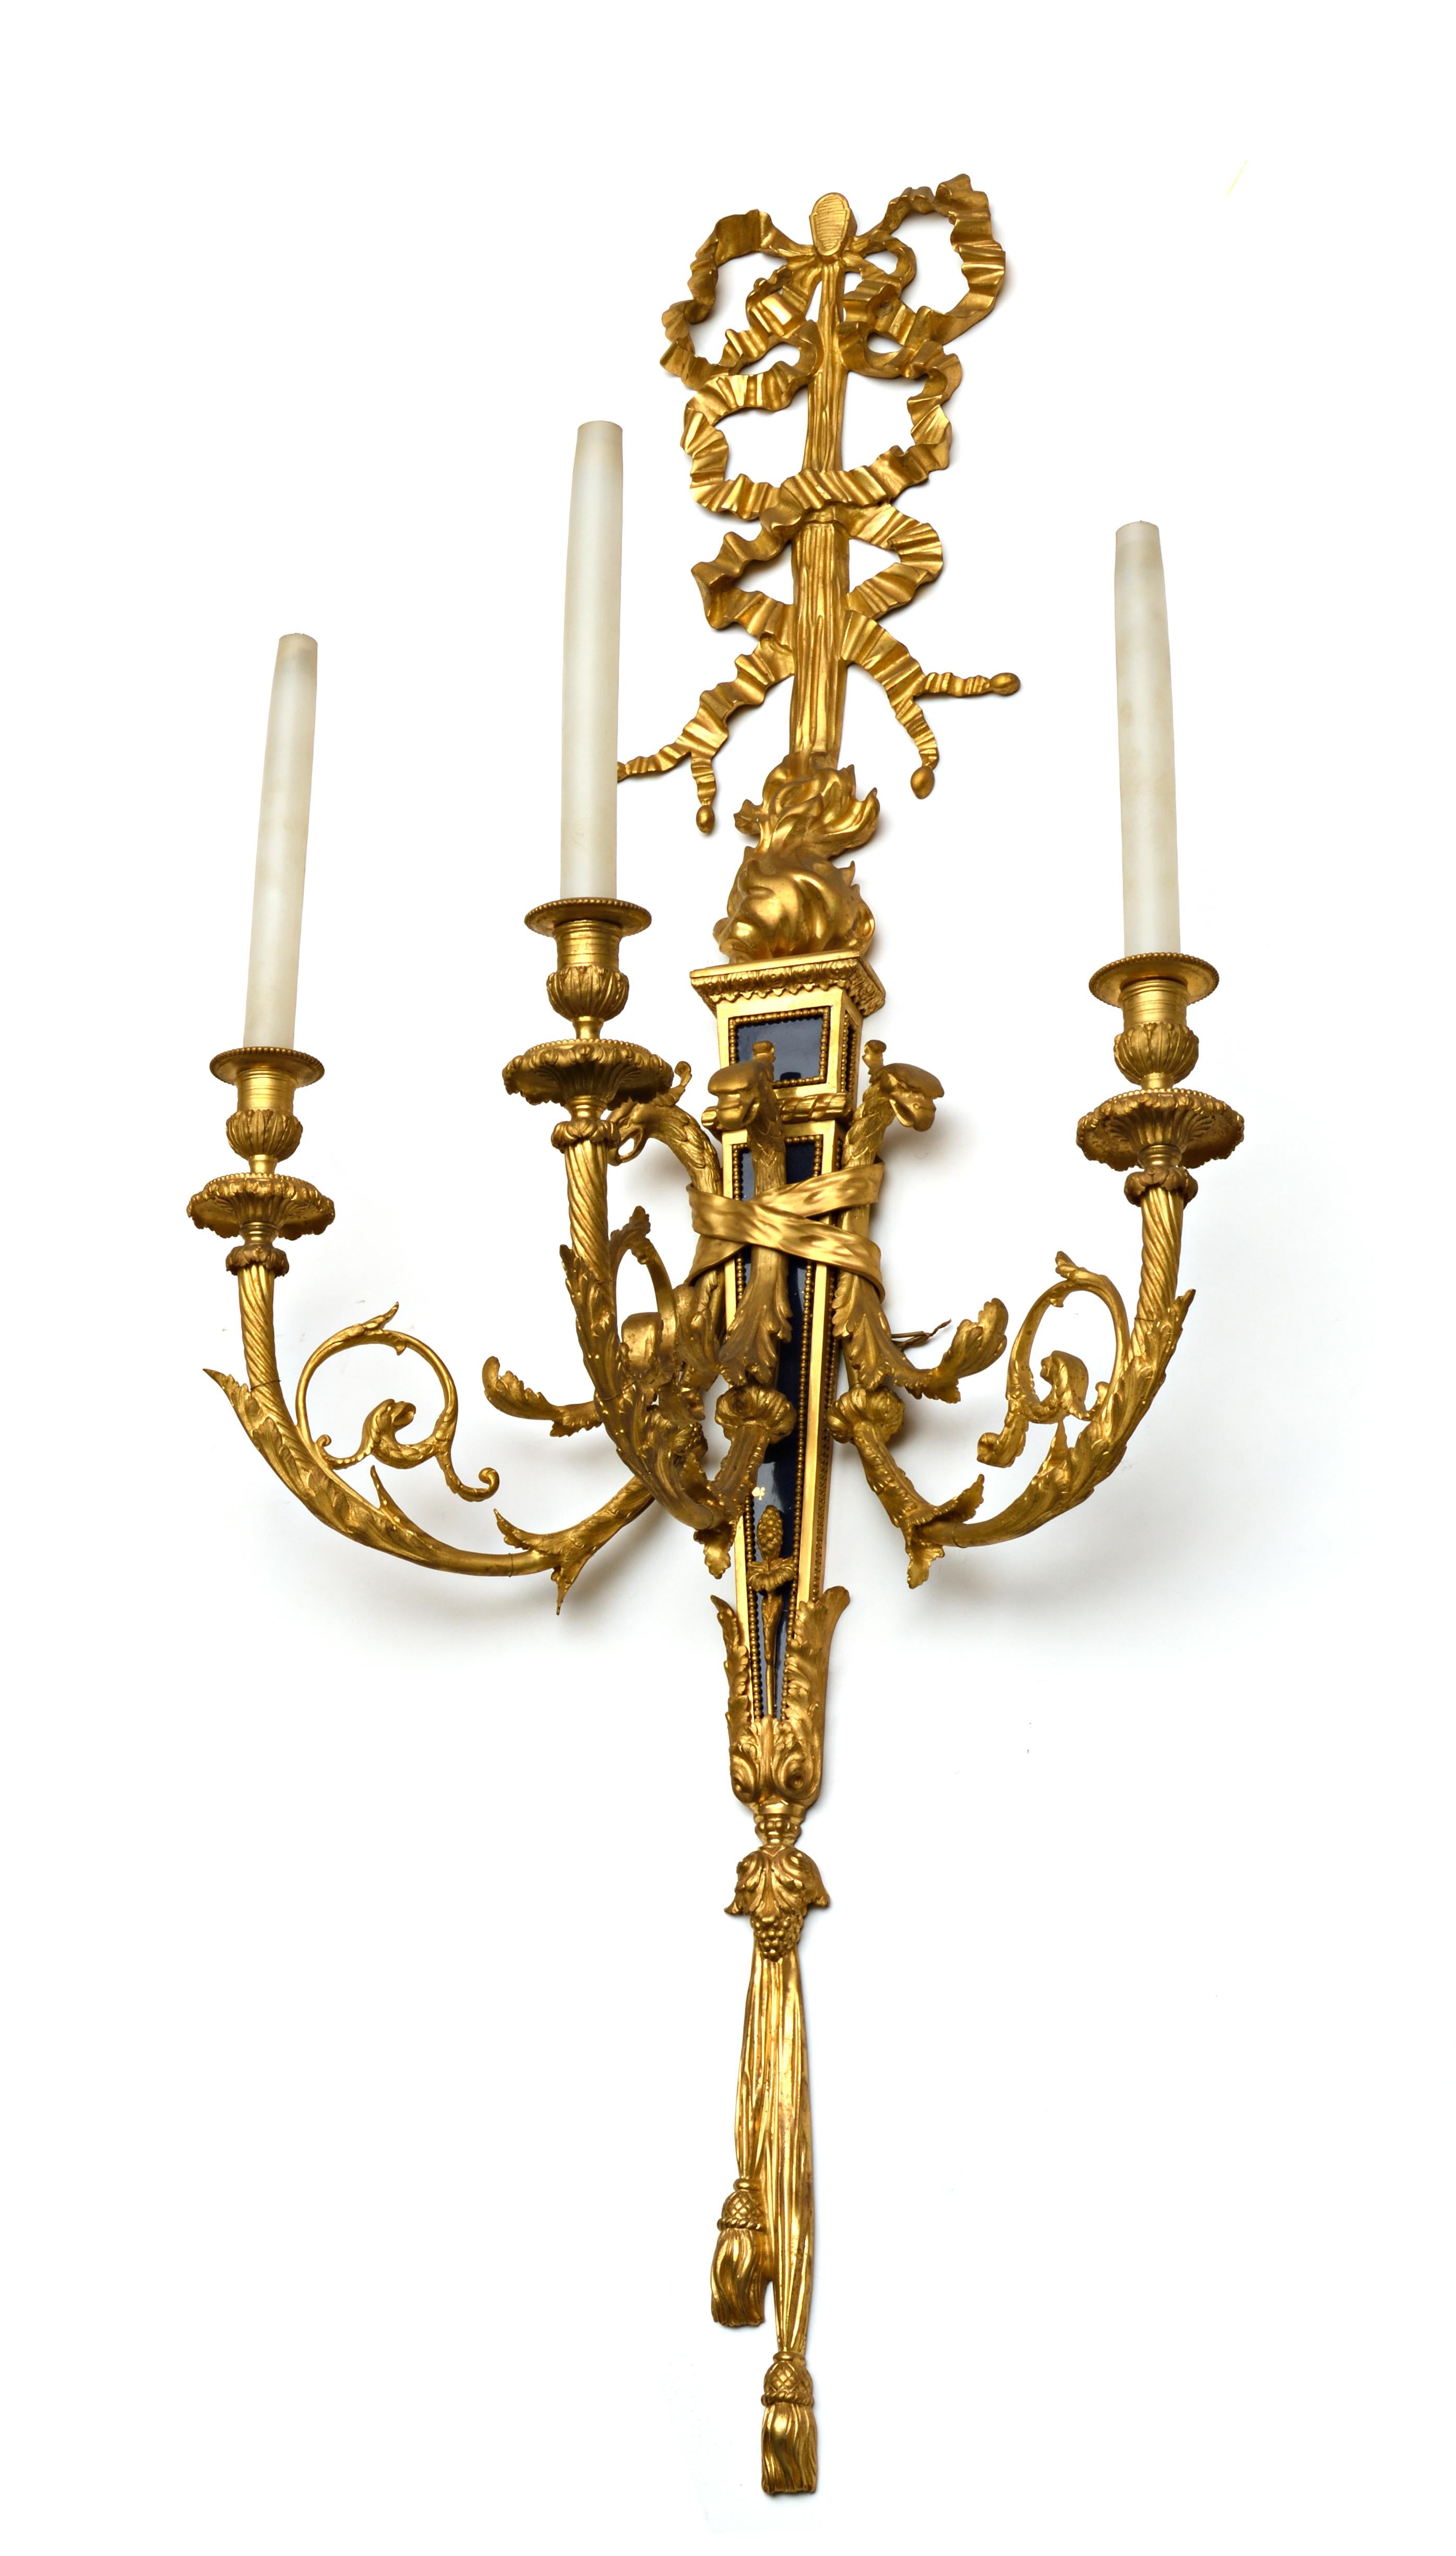 A finely cast pair of louis XVI style gilt bronze and blue steel three lights. Although
apparently unmarked. The quality of the bronze casting is of the highest Parisian 
standards of the period.